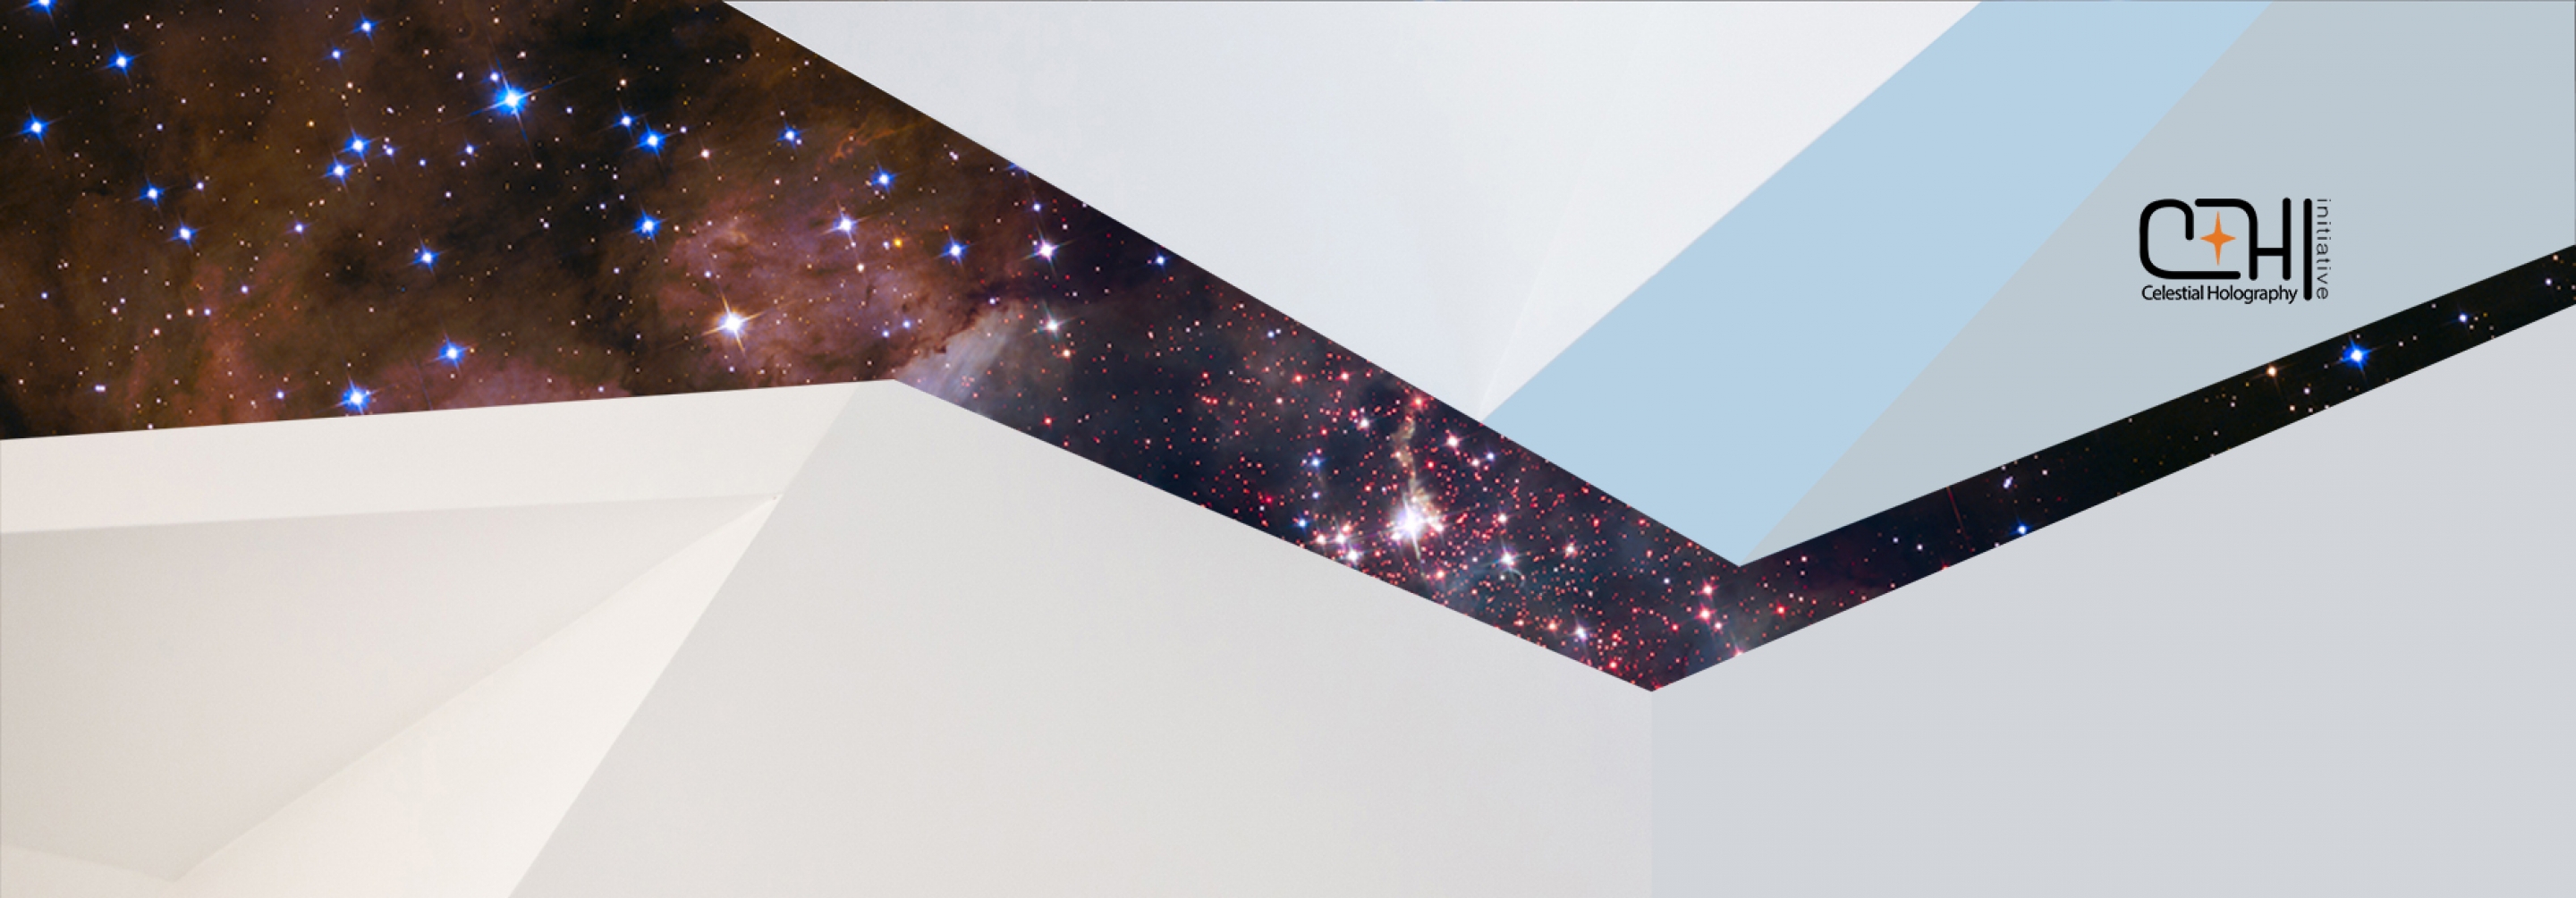 Background with angles and a universe image showing through